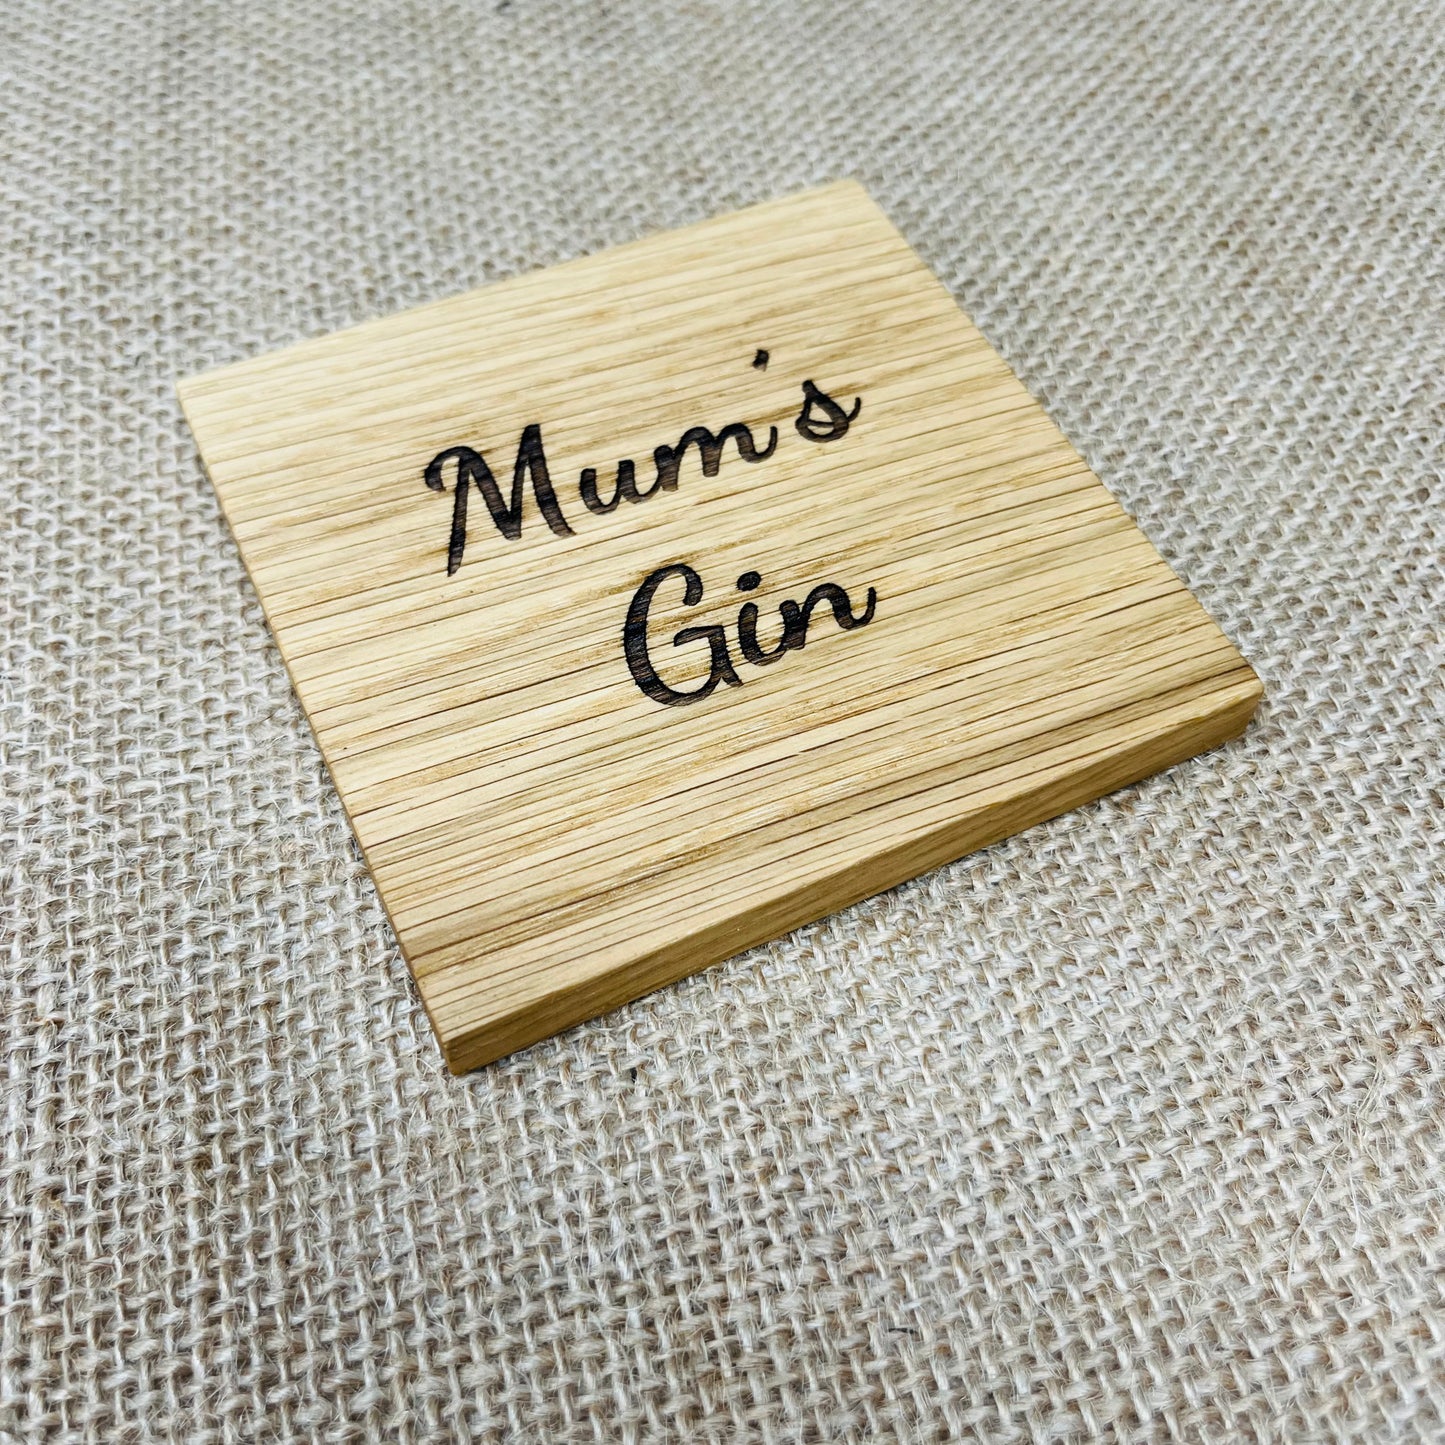 Mum's Gin Coaster - Engraved Solid Oak